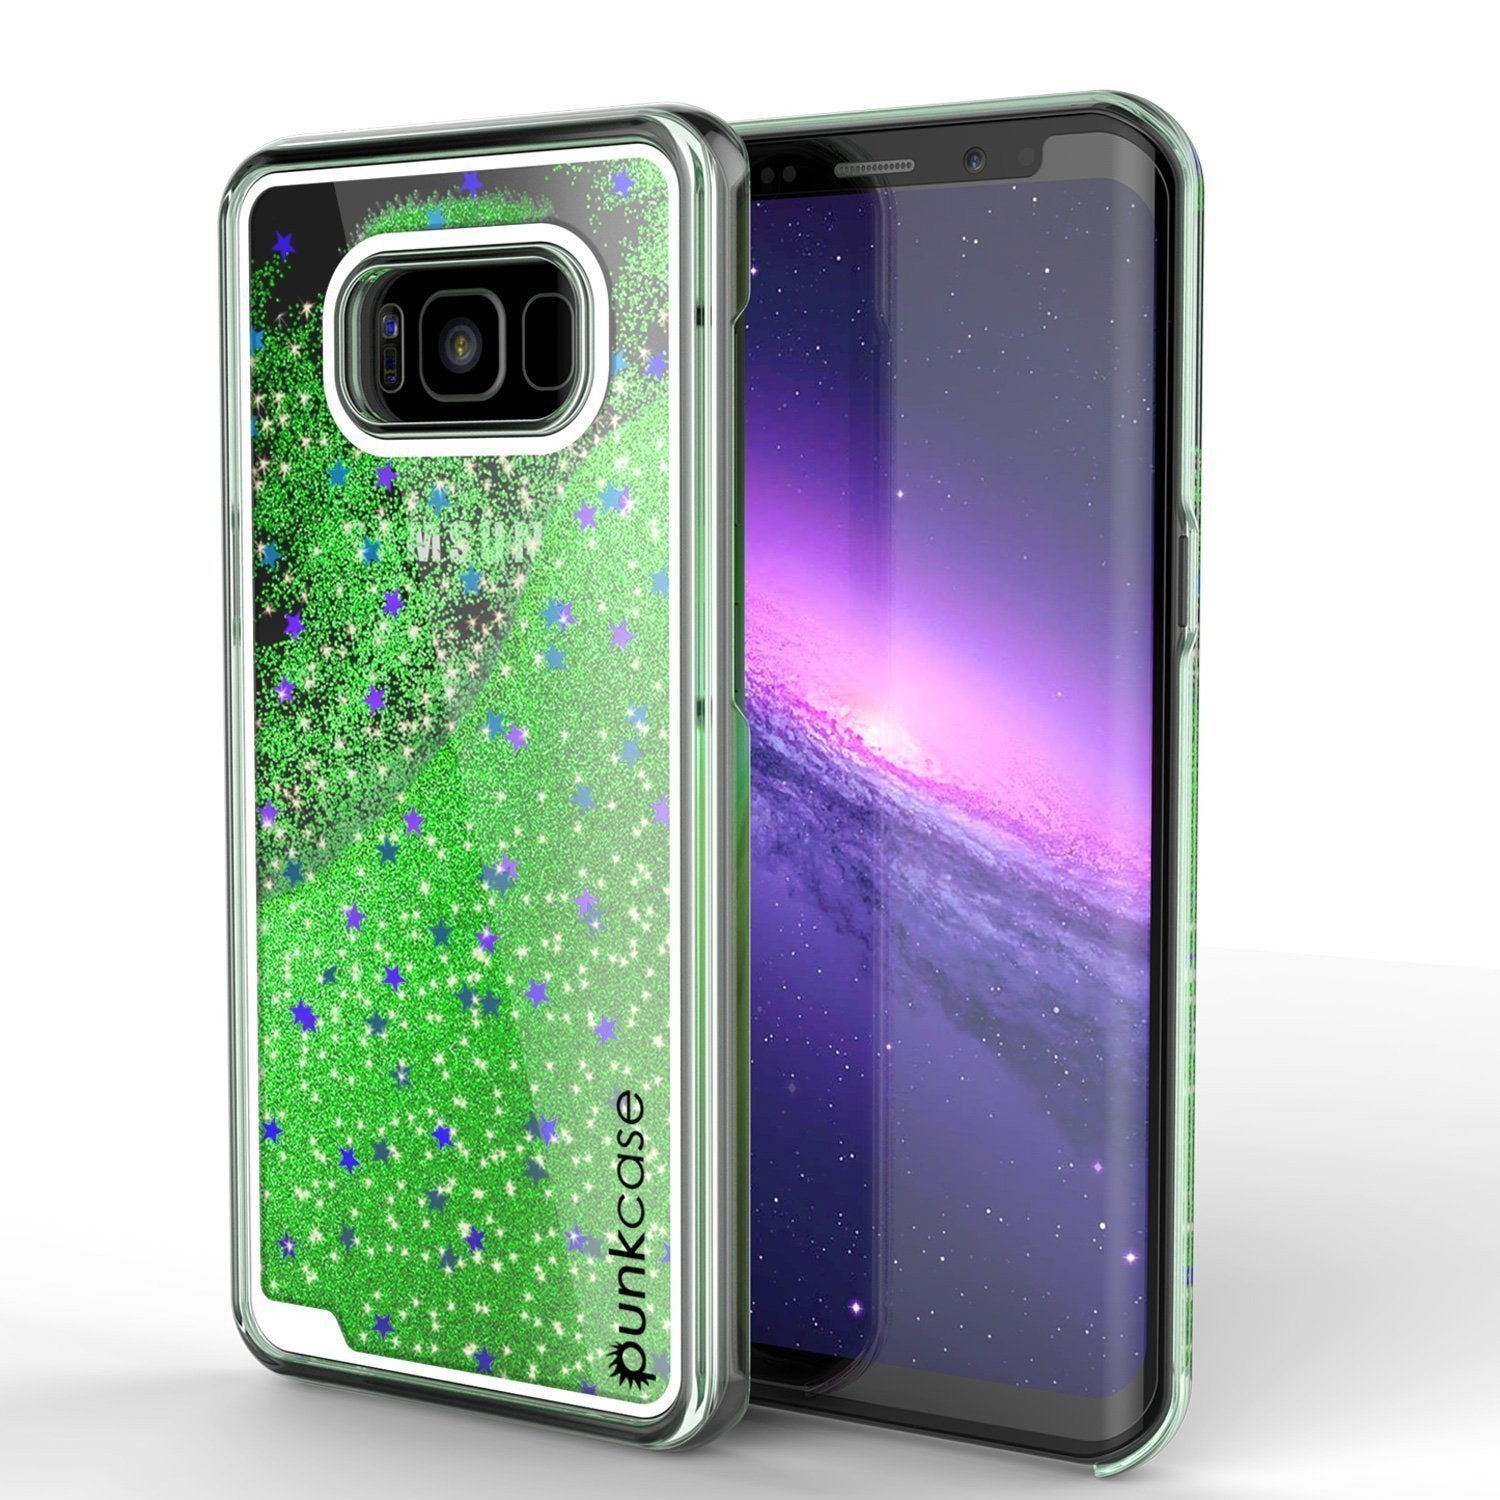 S8 Plus Case, Punkcase [Liquid Series] Protective Dual Layer Floating Glitter Cover with lots of Bling & Sparkle + PunkShield Screen Protector for Samsungs Galaxy S8+ [Green]